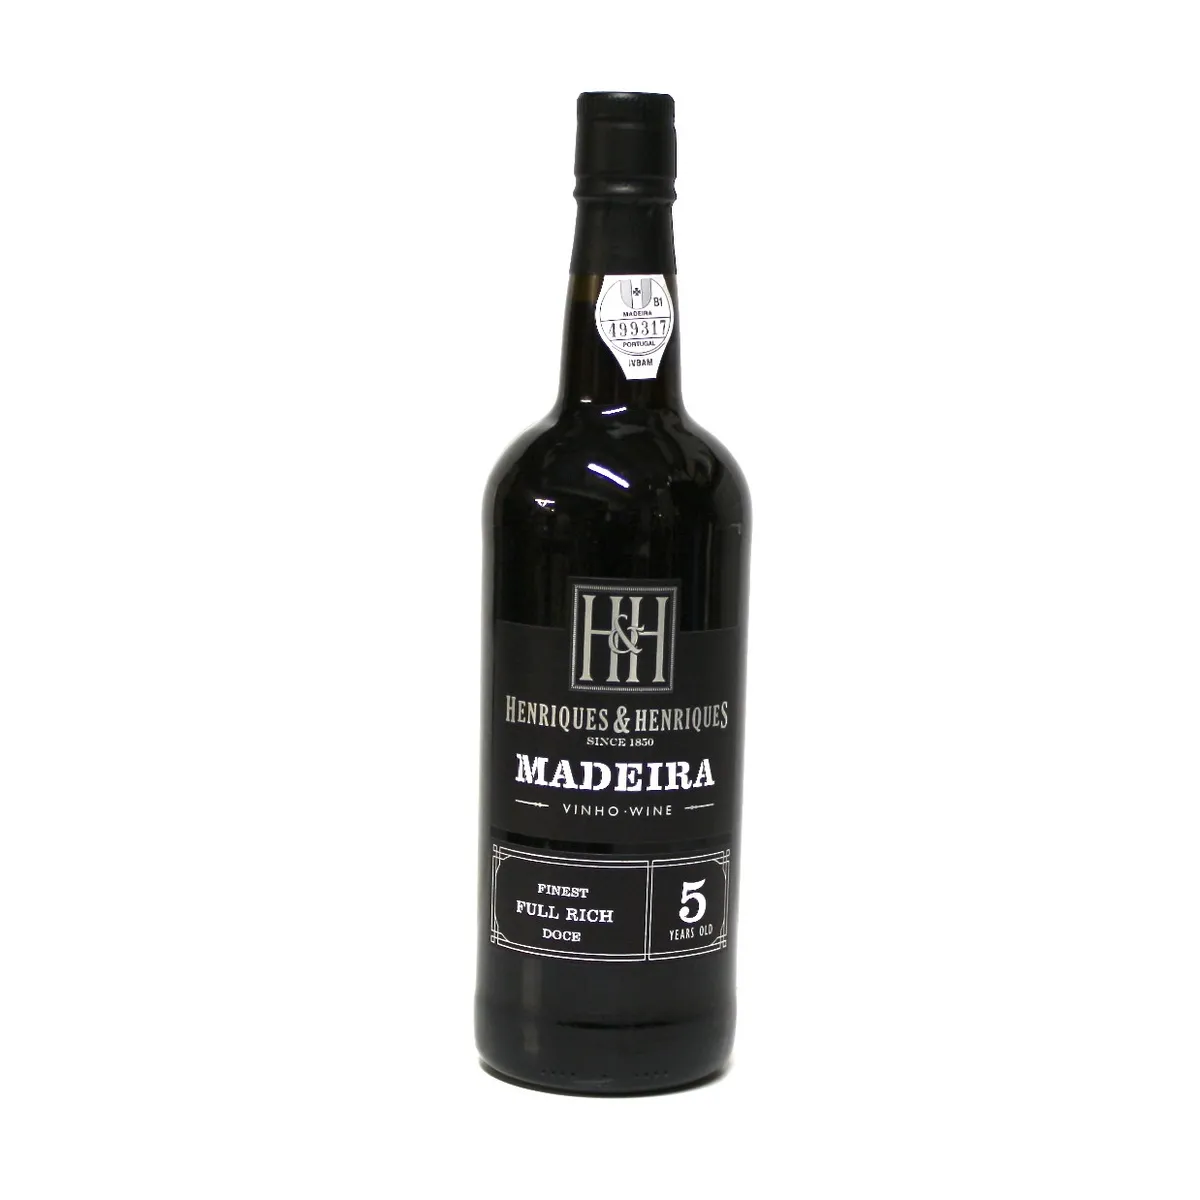 madeira 5 years doce henriques & henriques 19 ° 75 cl